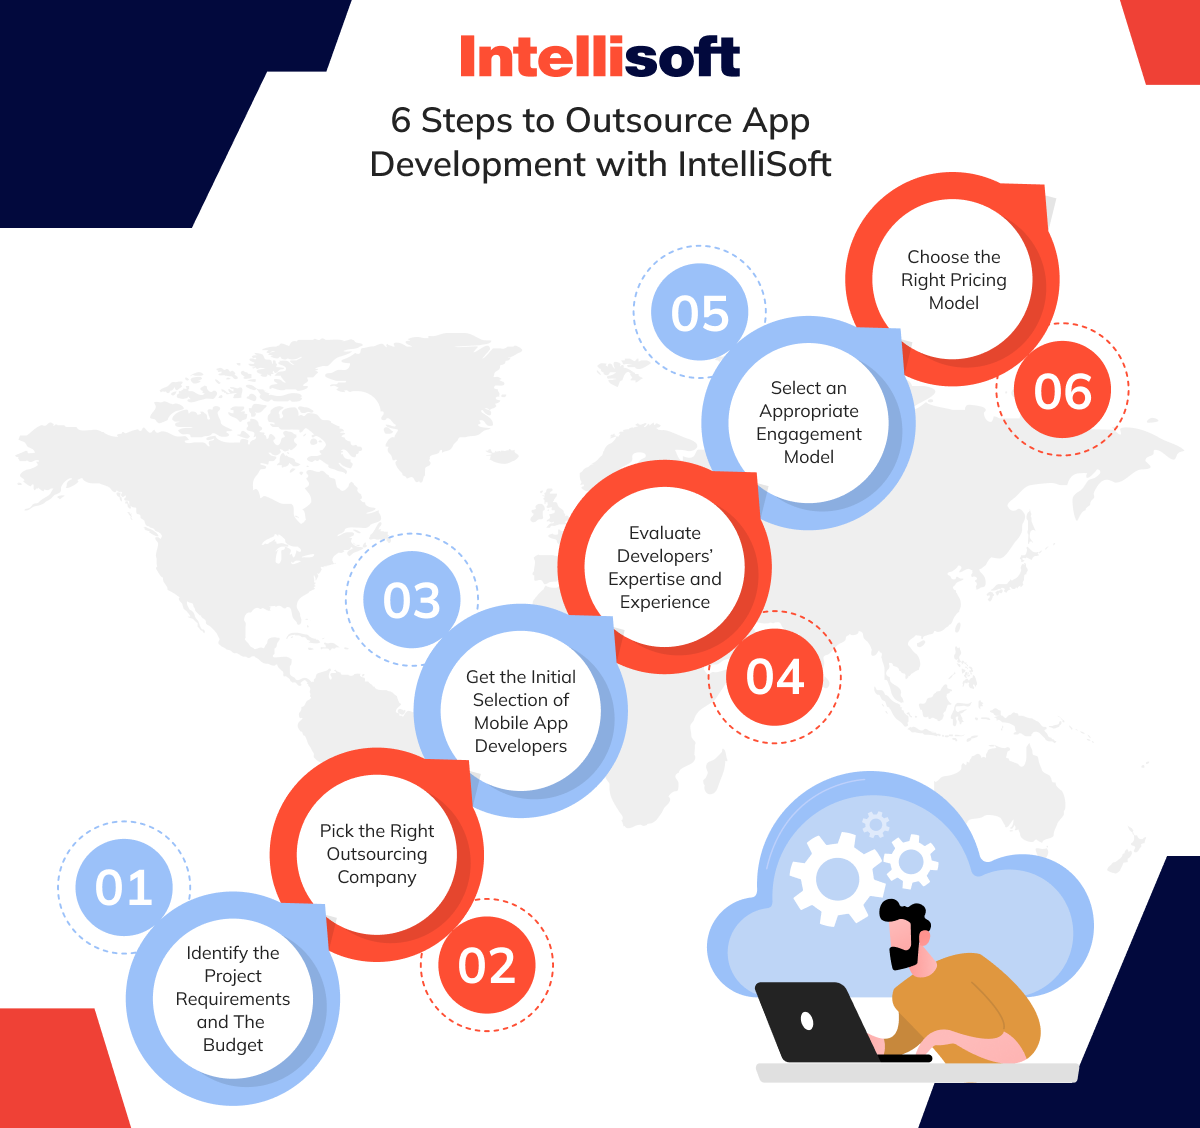 6 Steps to Outsource App Development with IntelliSoft